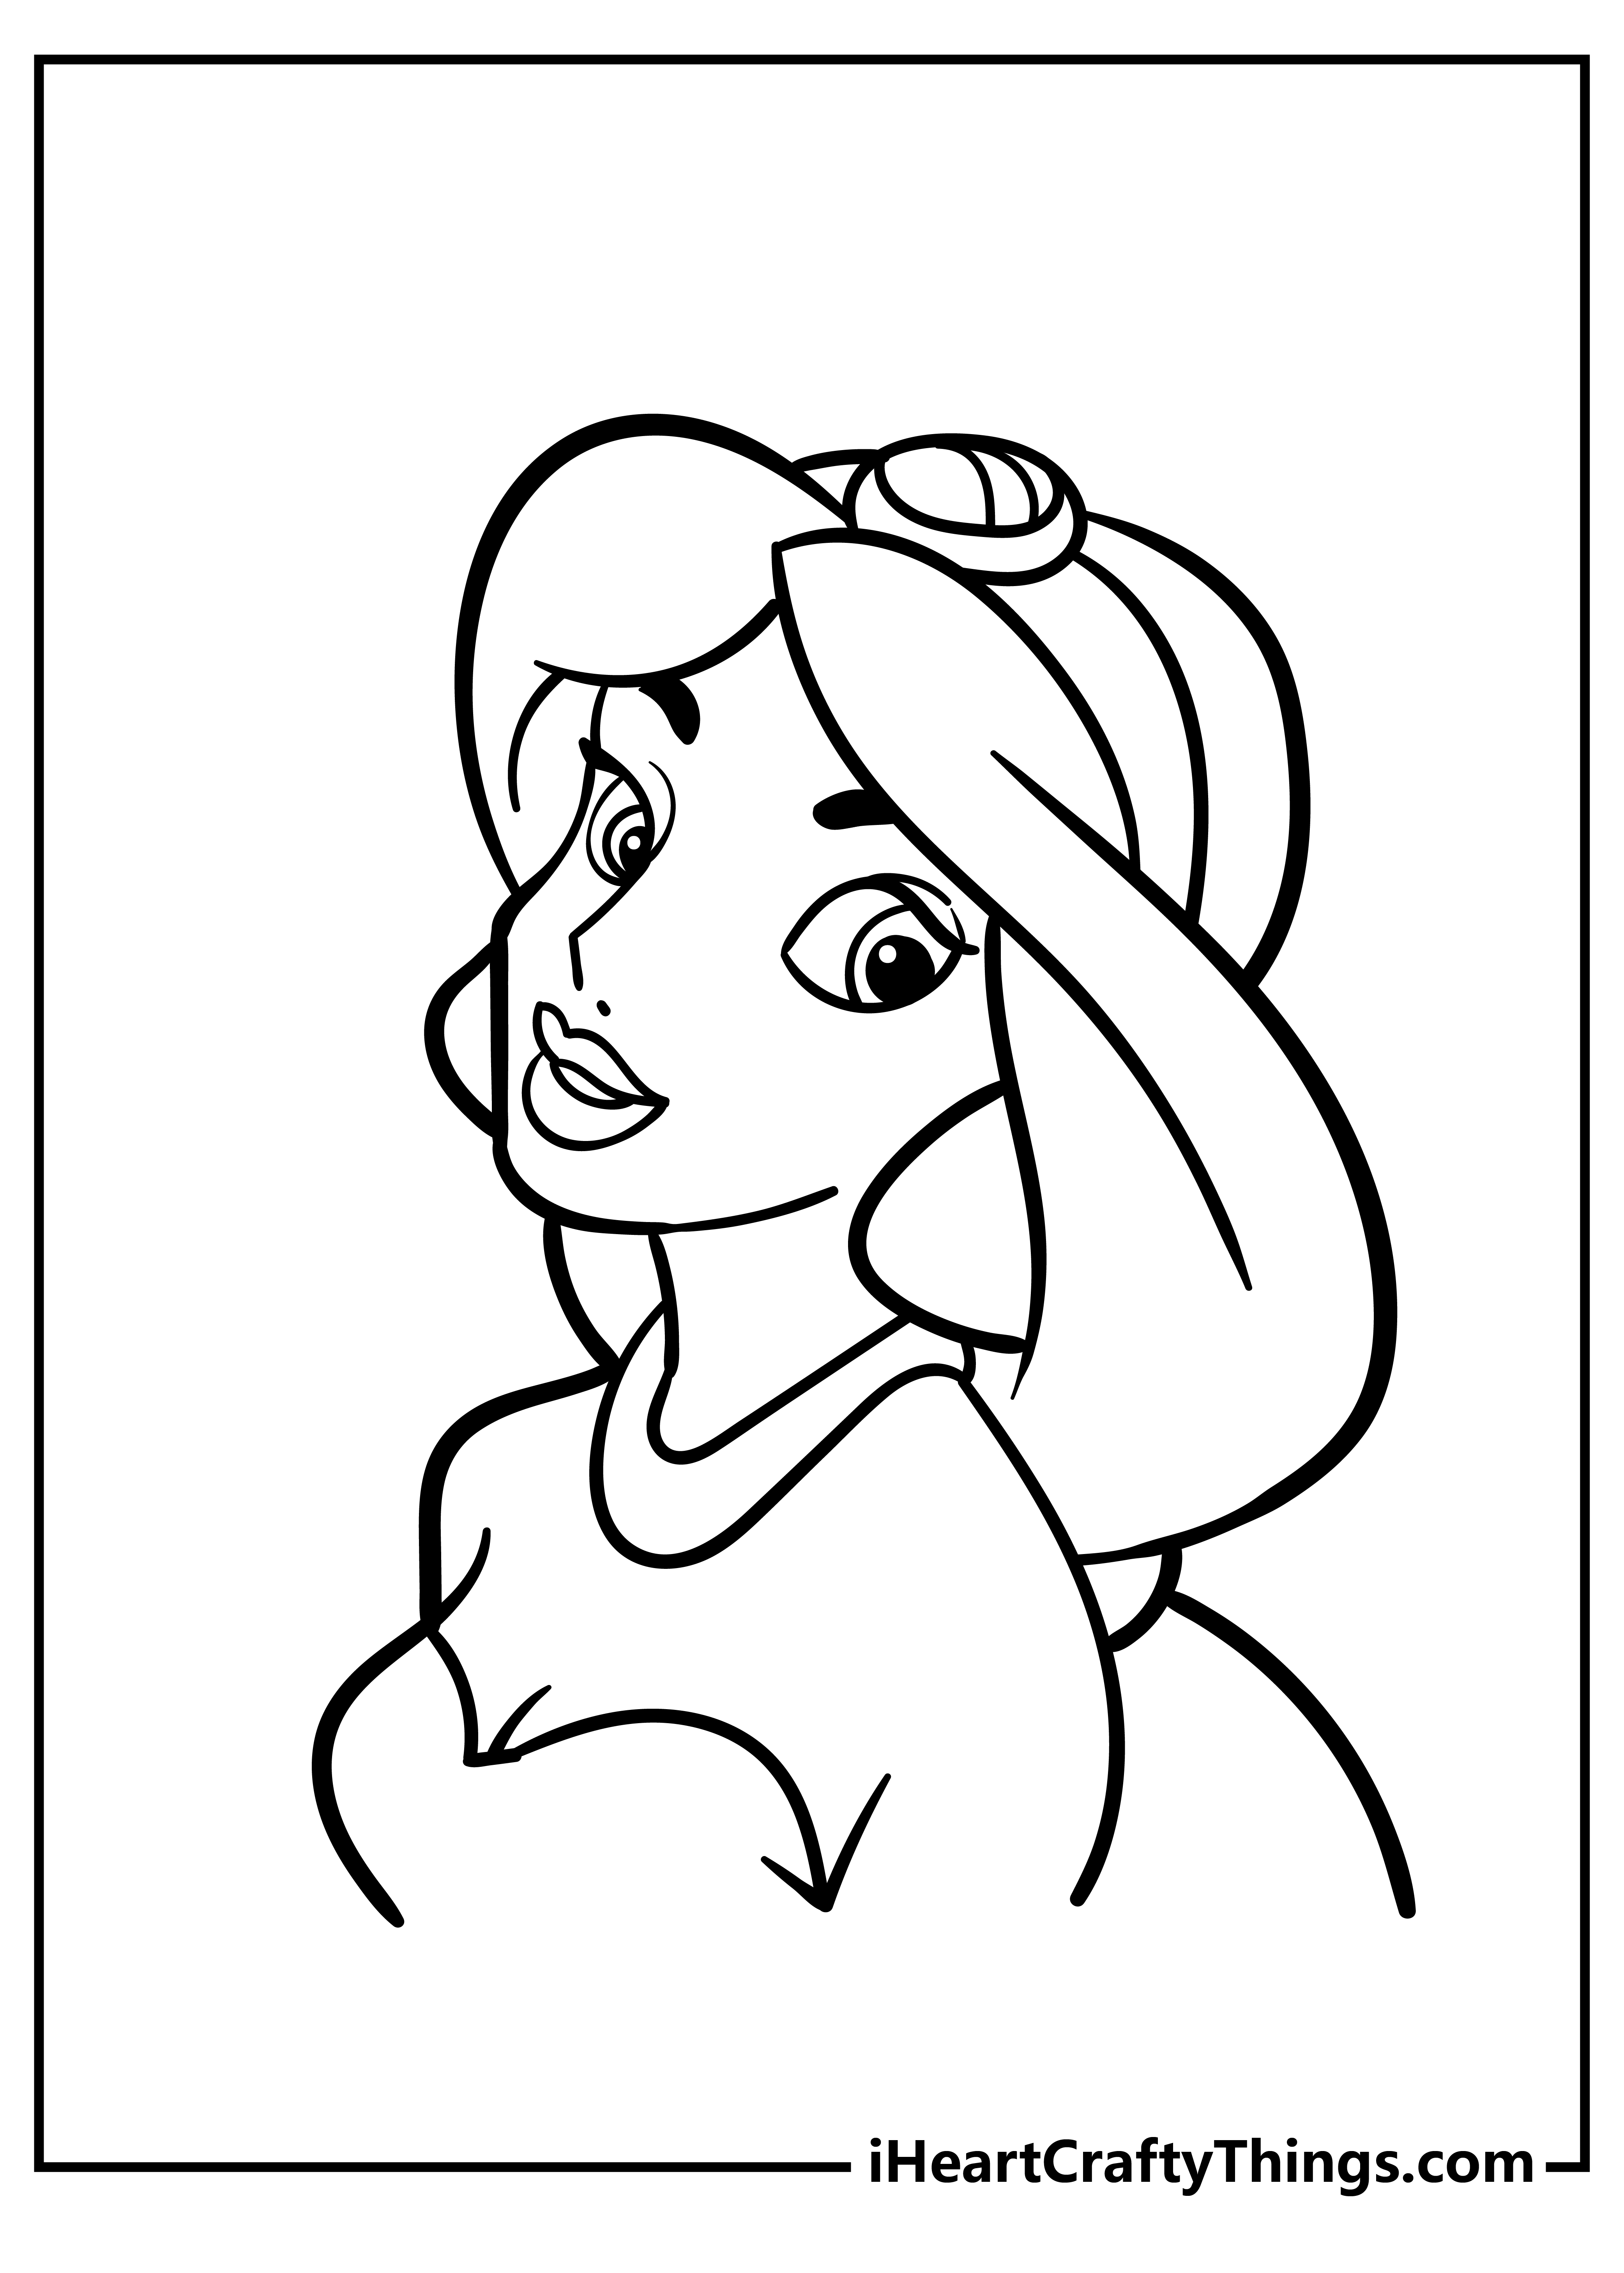 Jasmine Coloring Pages for kids free download